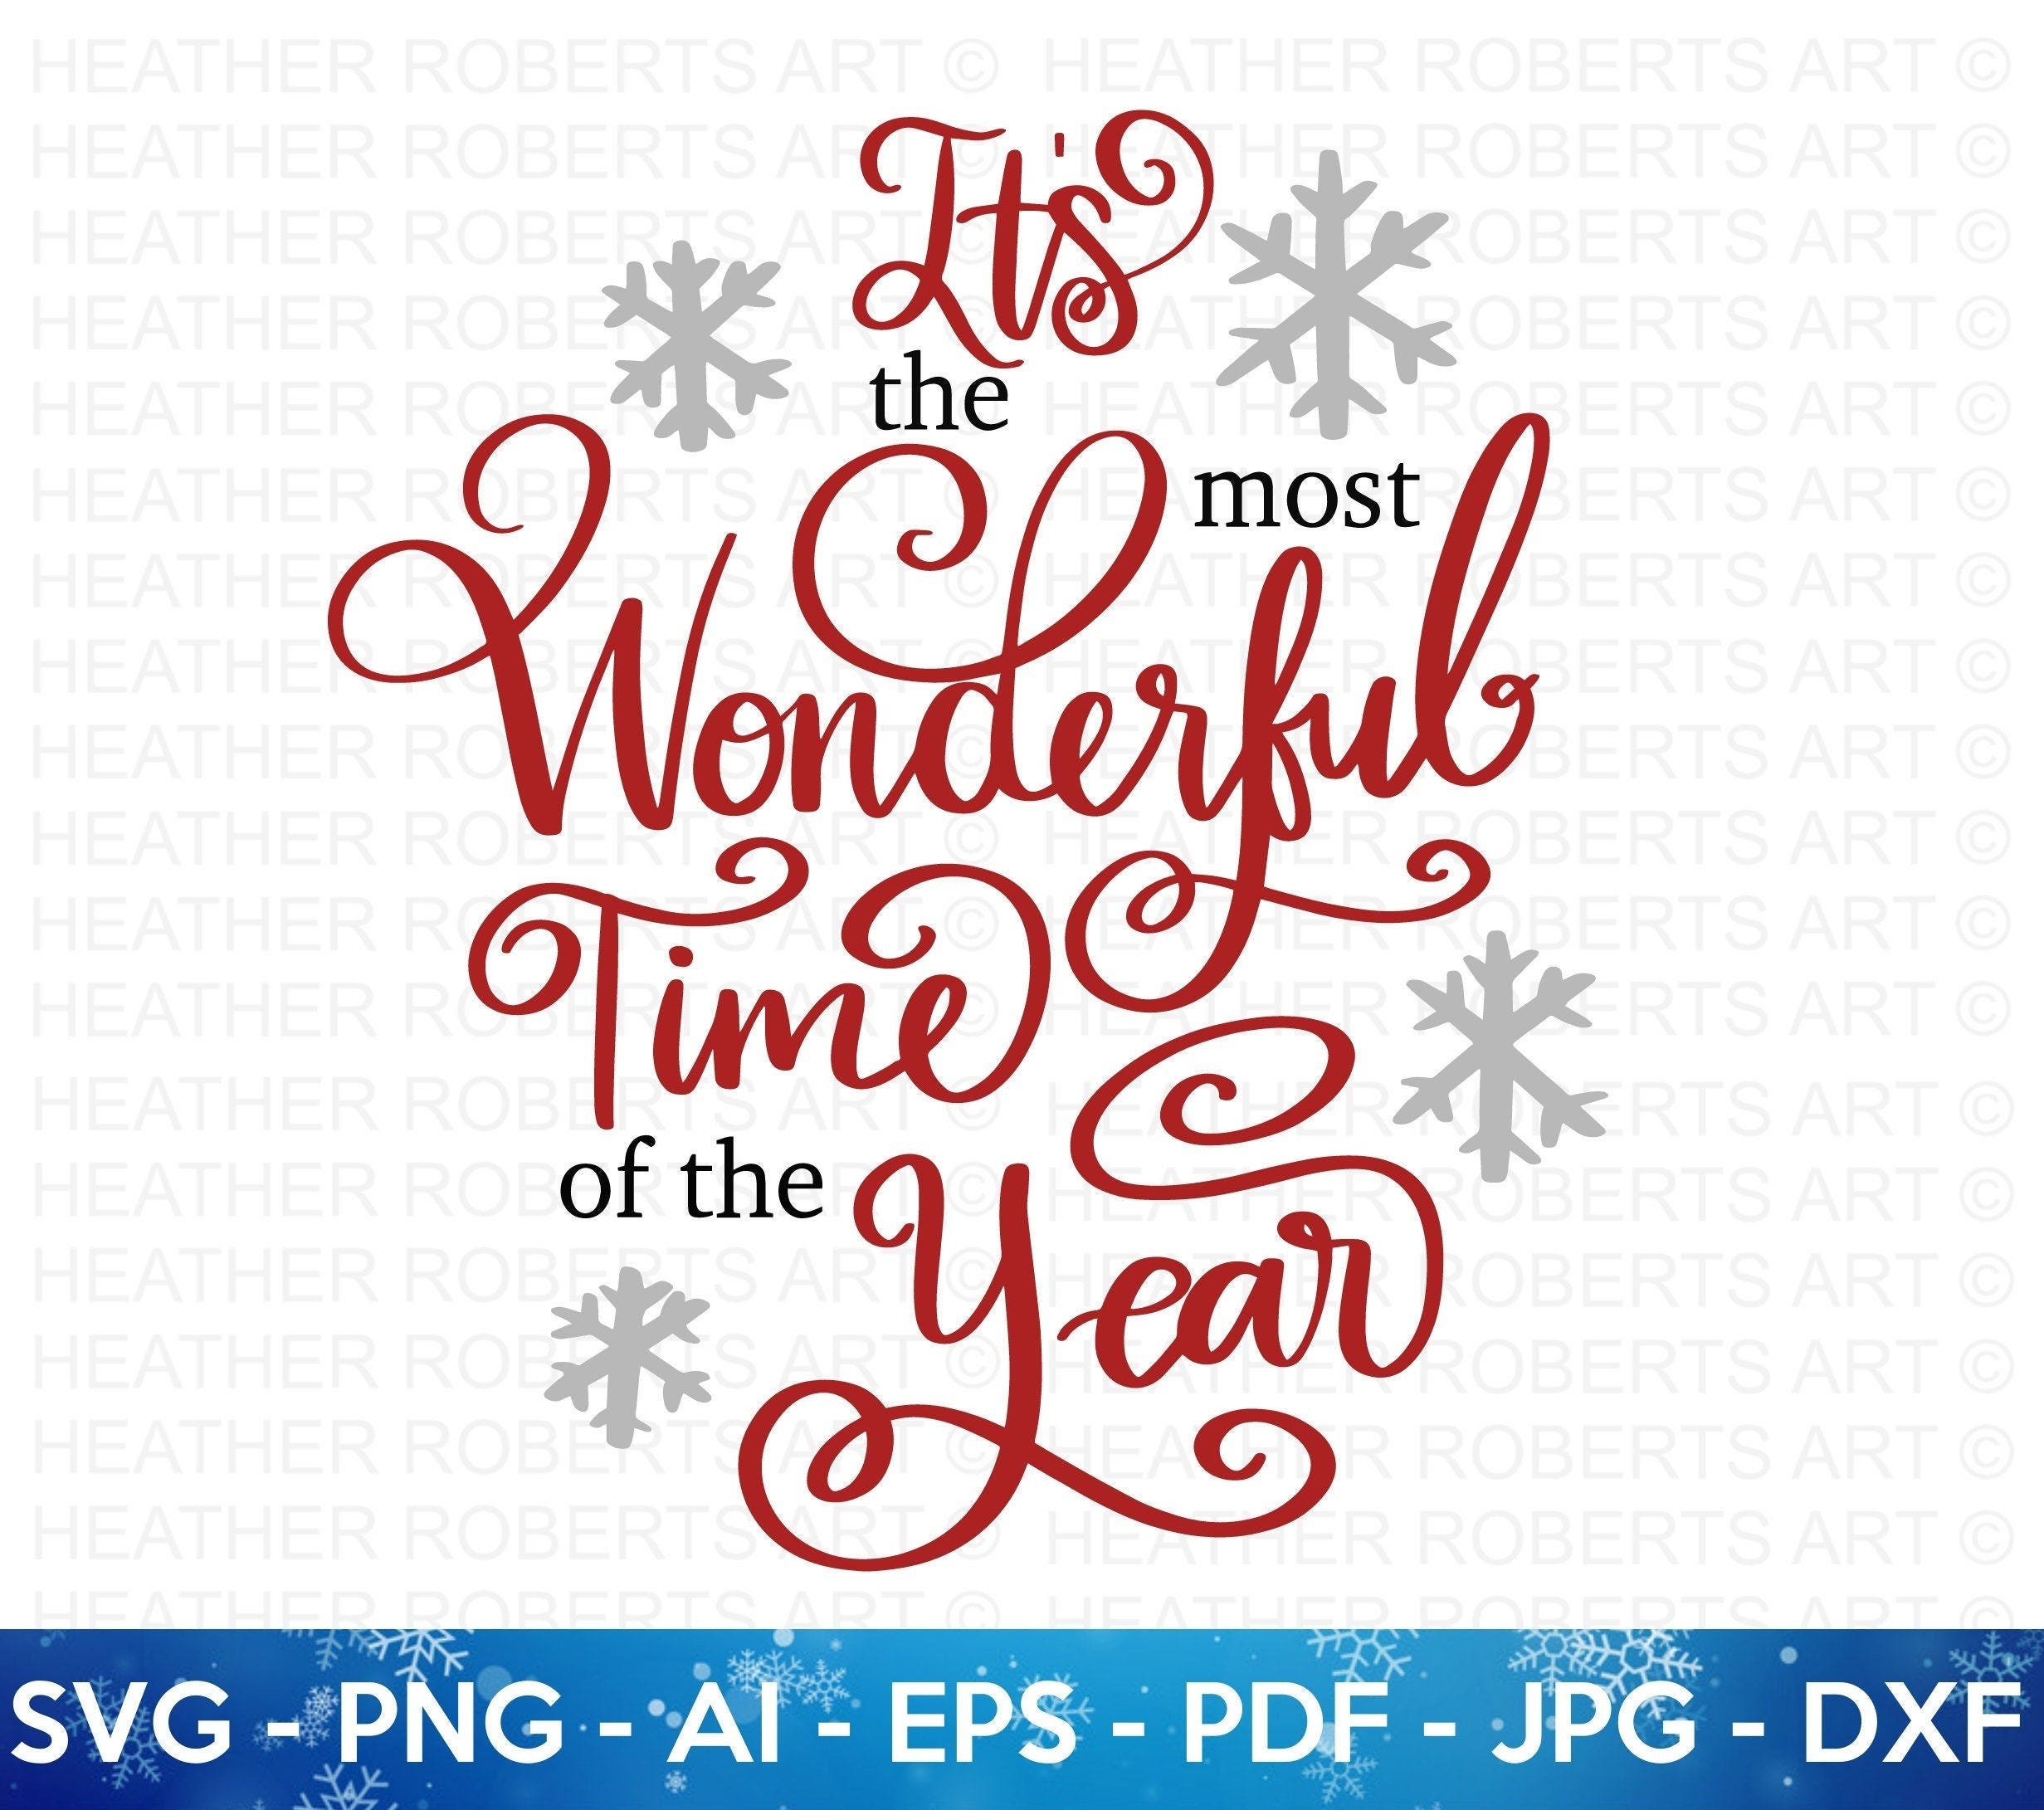 The Most Wonderful Time of the Year SVG, Christmas Family Shirts SVG, Christmas Sign svg, Christmas svg, Hand-lettered svg, Cricut Cut File